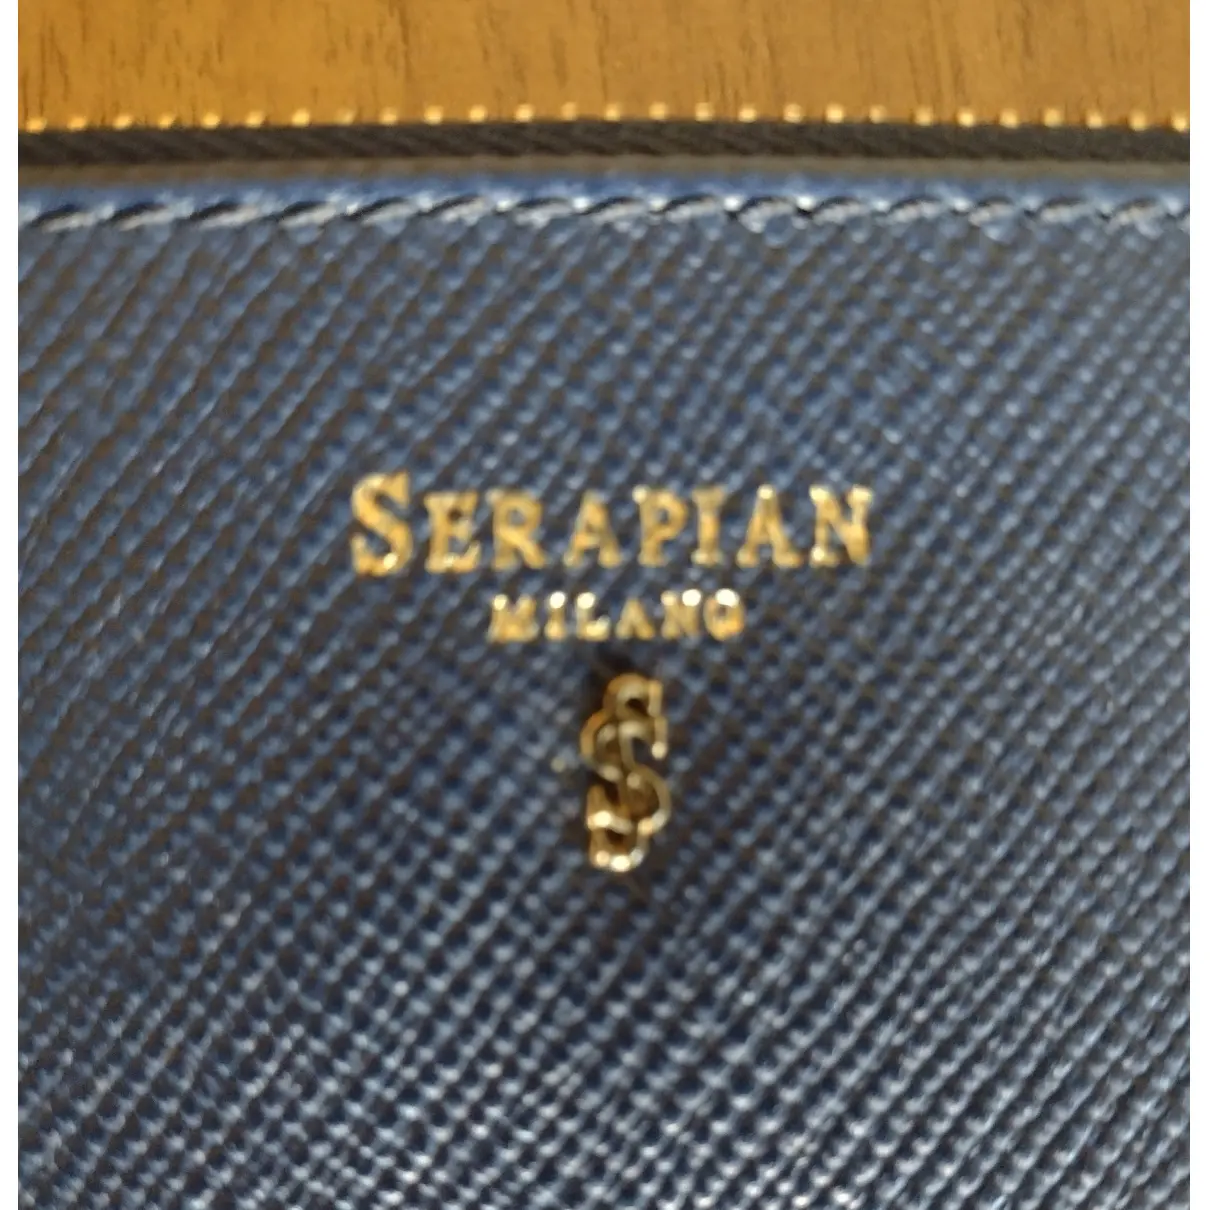 Buy SERAPIAN Leather small bag online